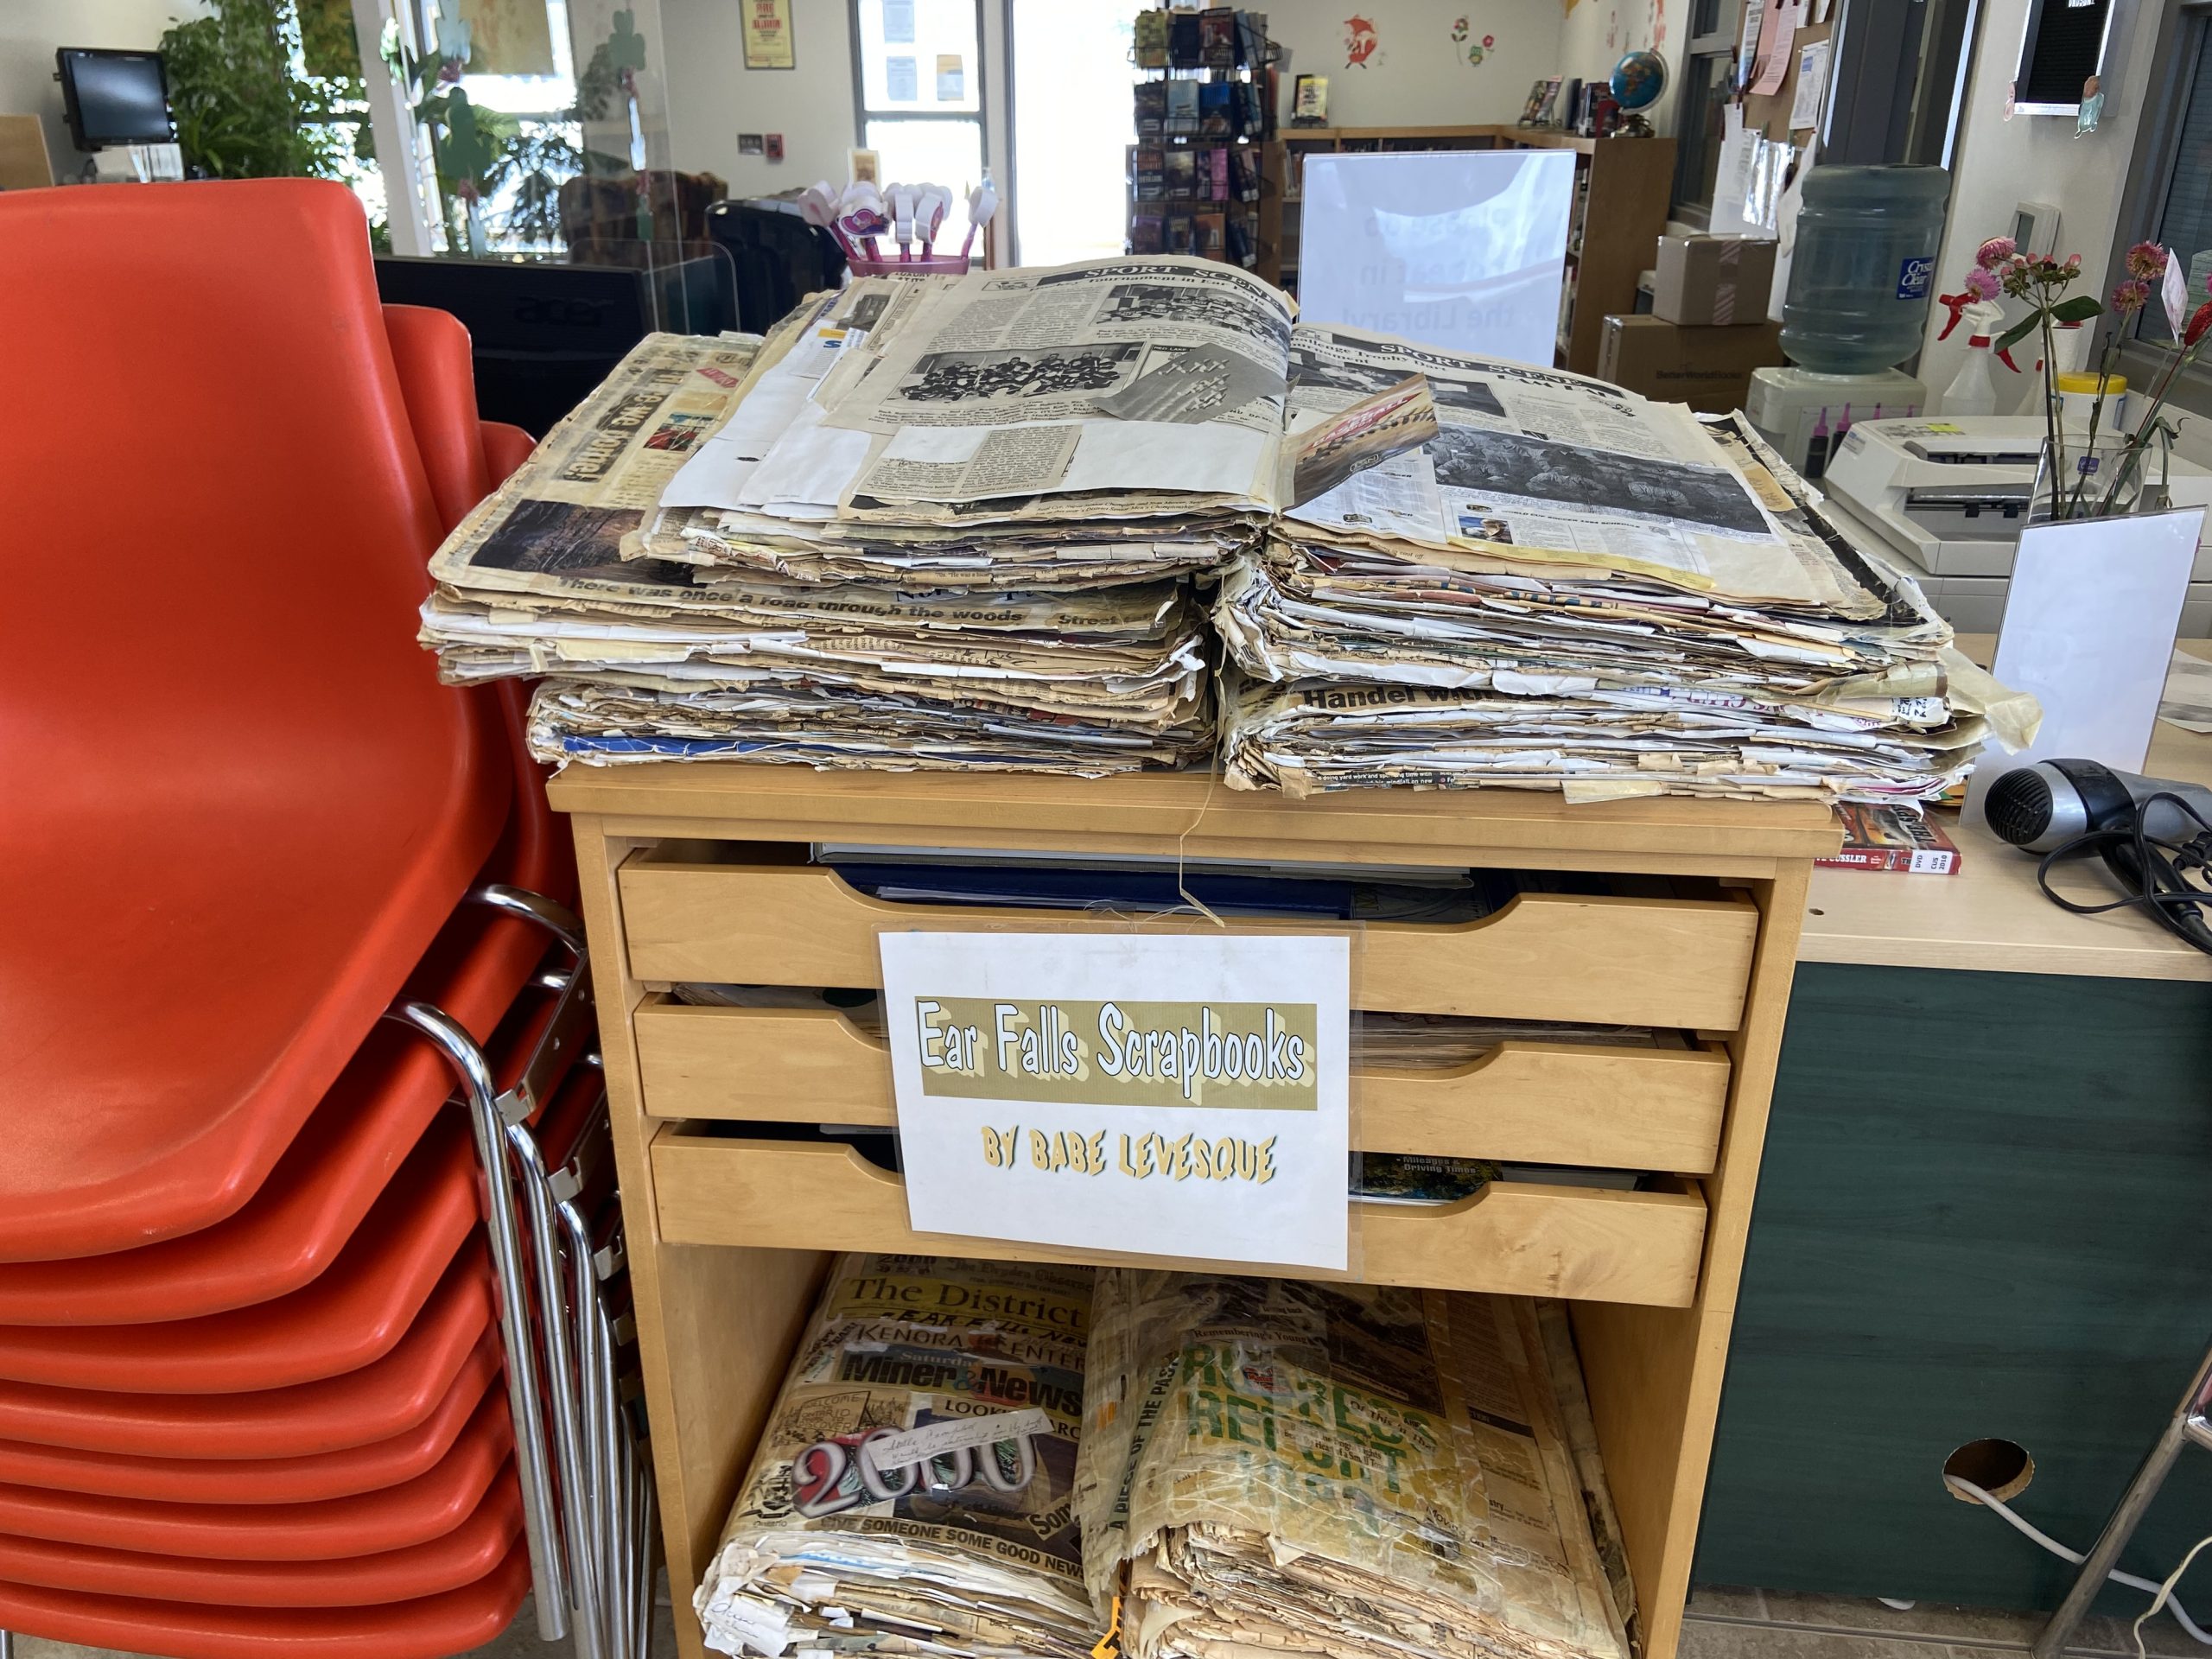 Various old newspapers and various other paper to be recycled lines a desk. A sign is placed on the front reading "Ear Falls Scrapbooks by Babe Levesque".